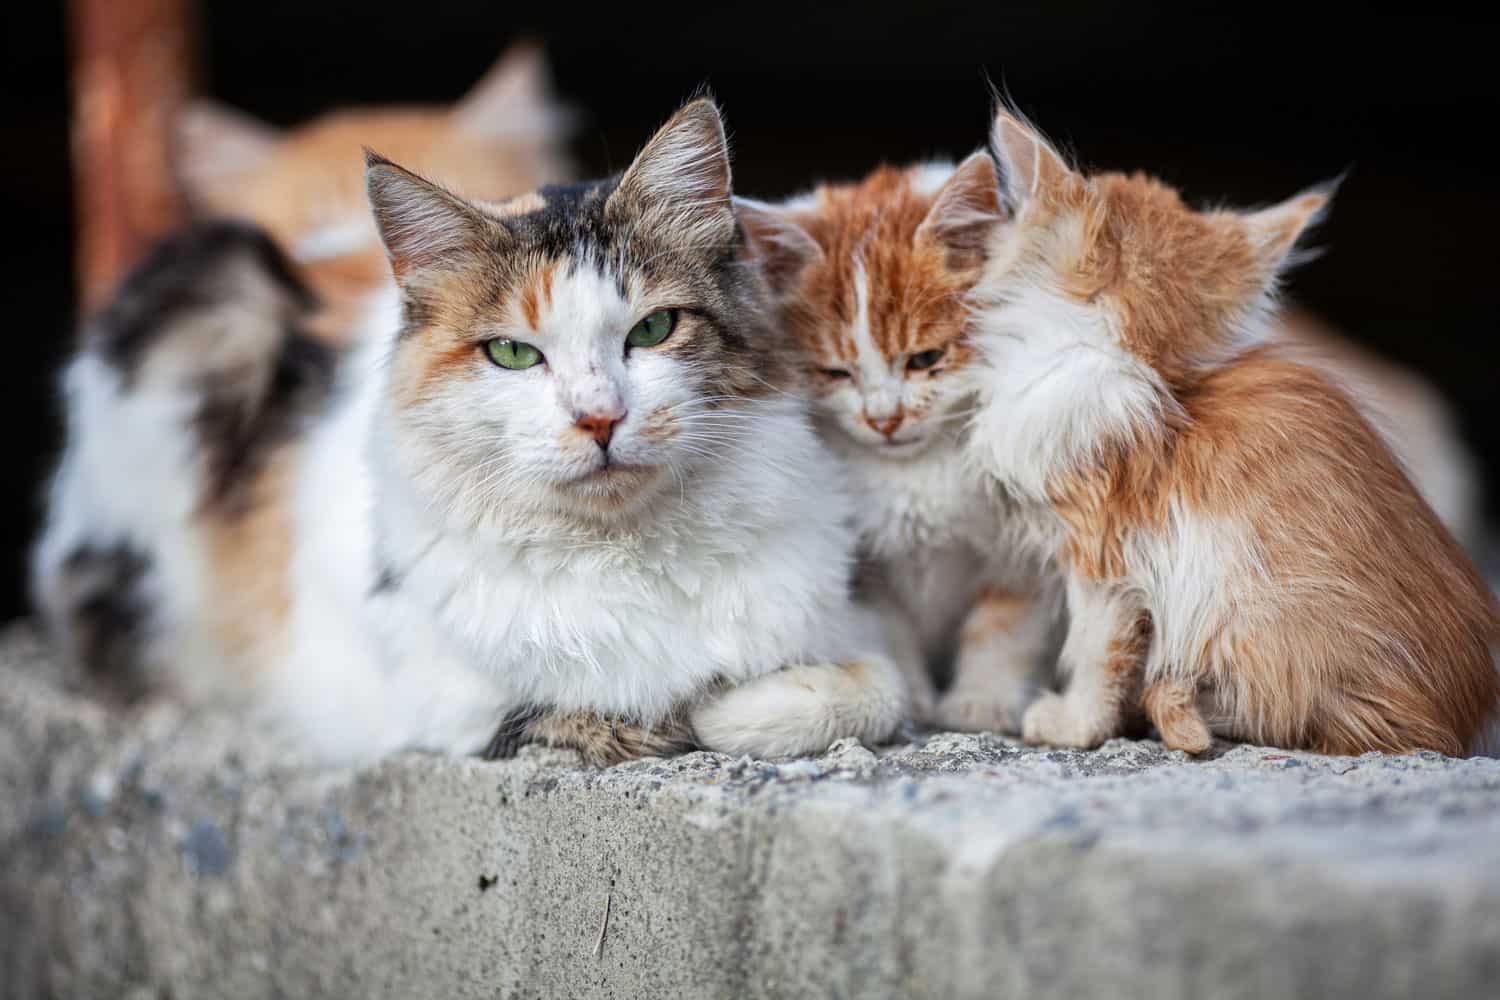 Stray cats on the streets of Cyprus
